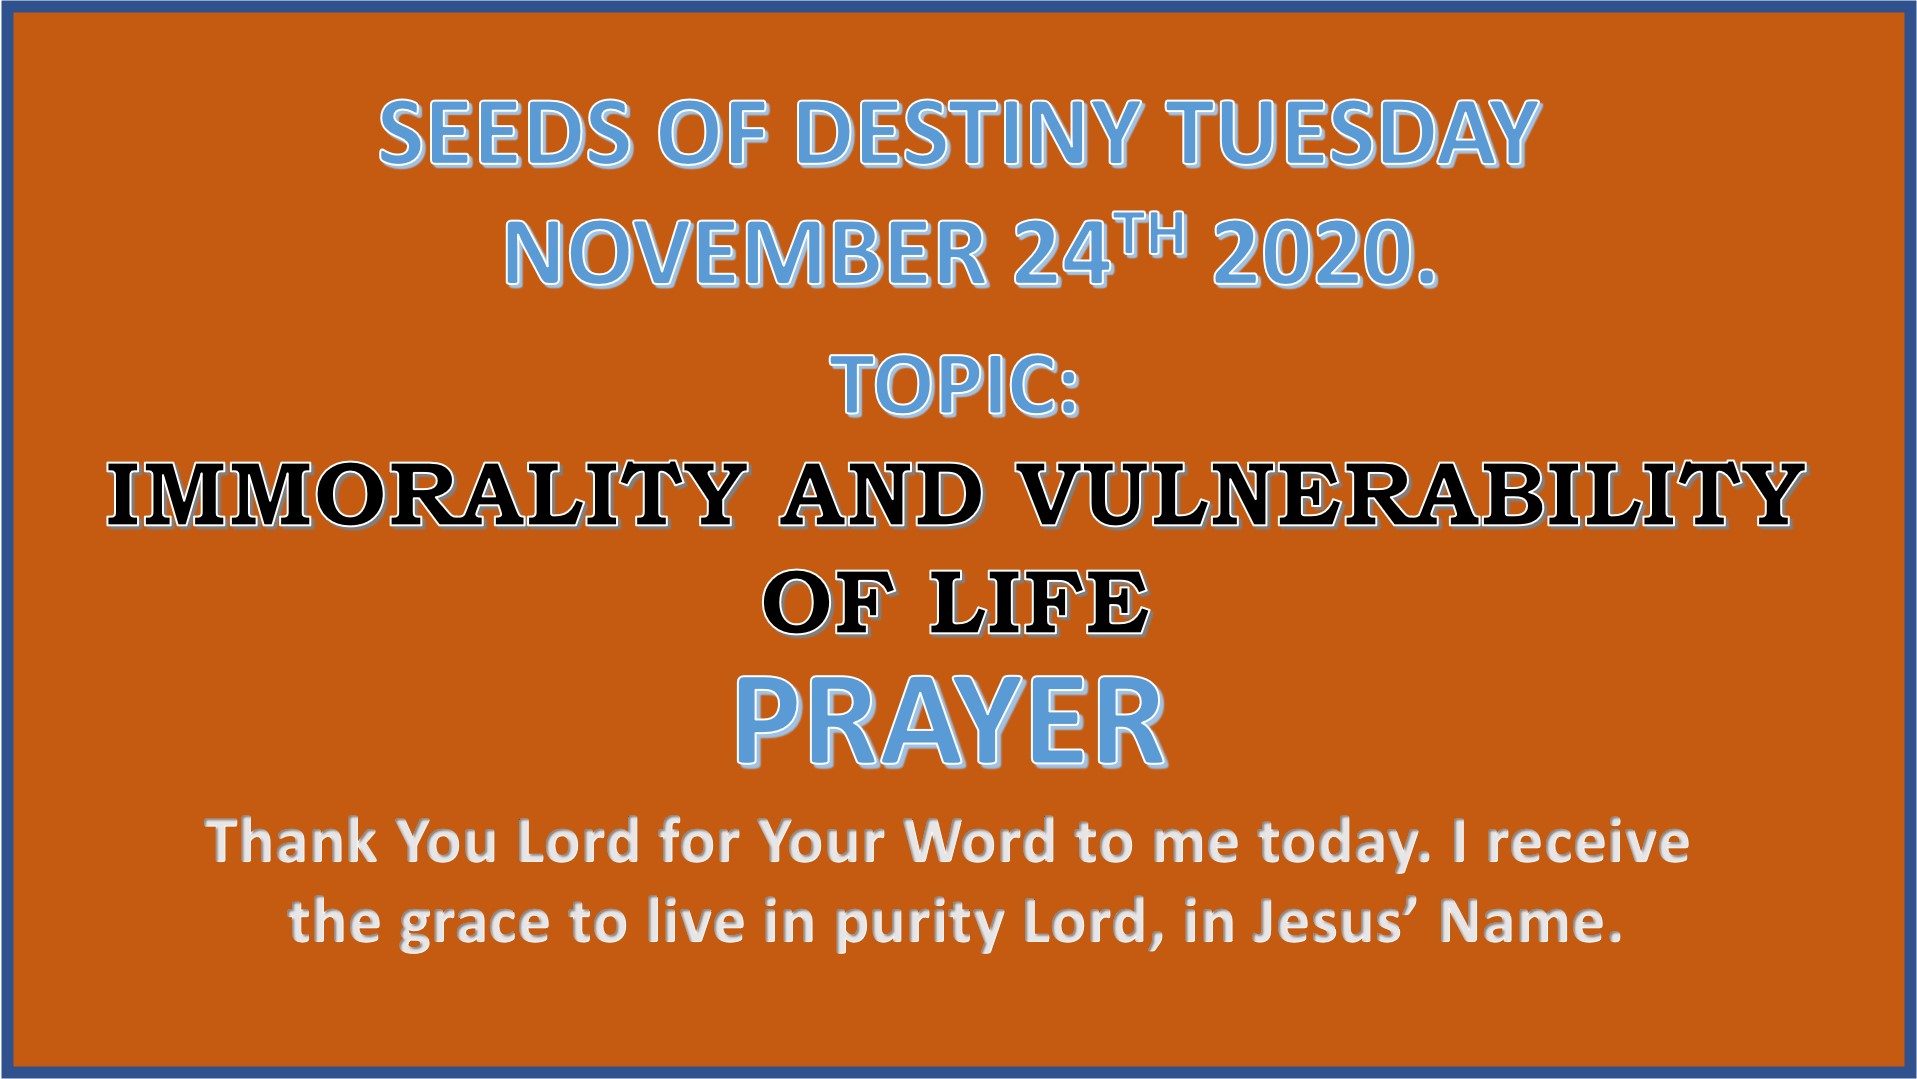 Seeds of Destiny Tuesday 24th November 2020 by Dr Paul Enenche.